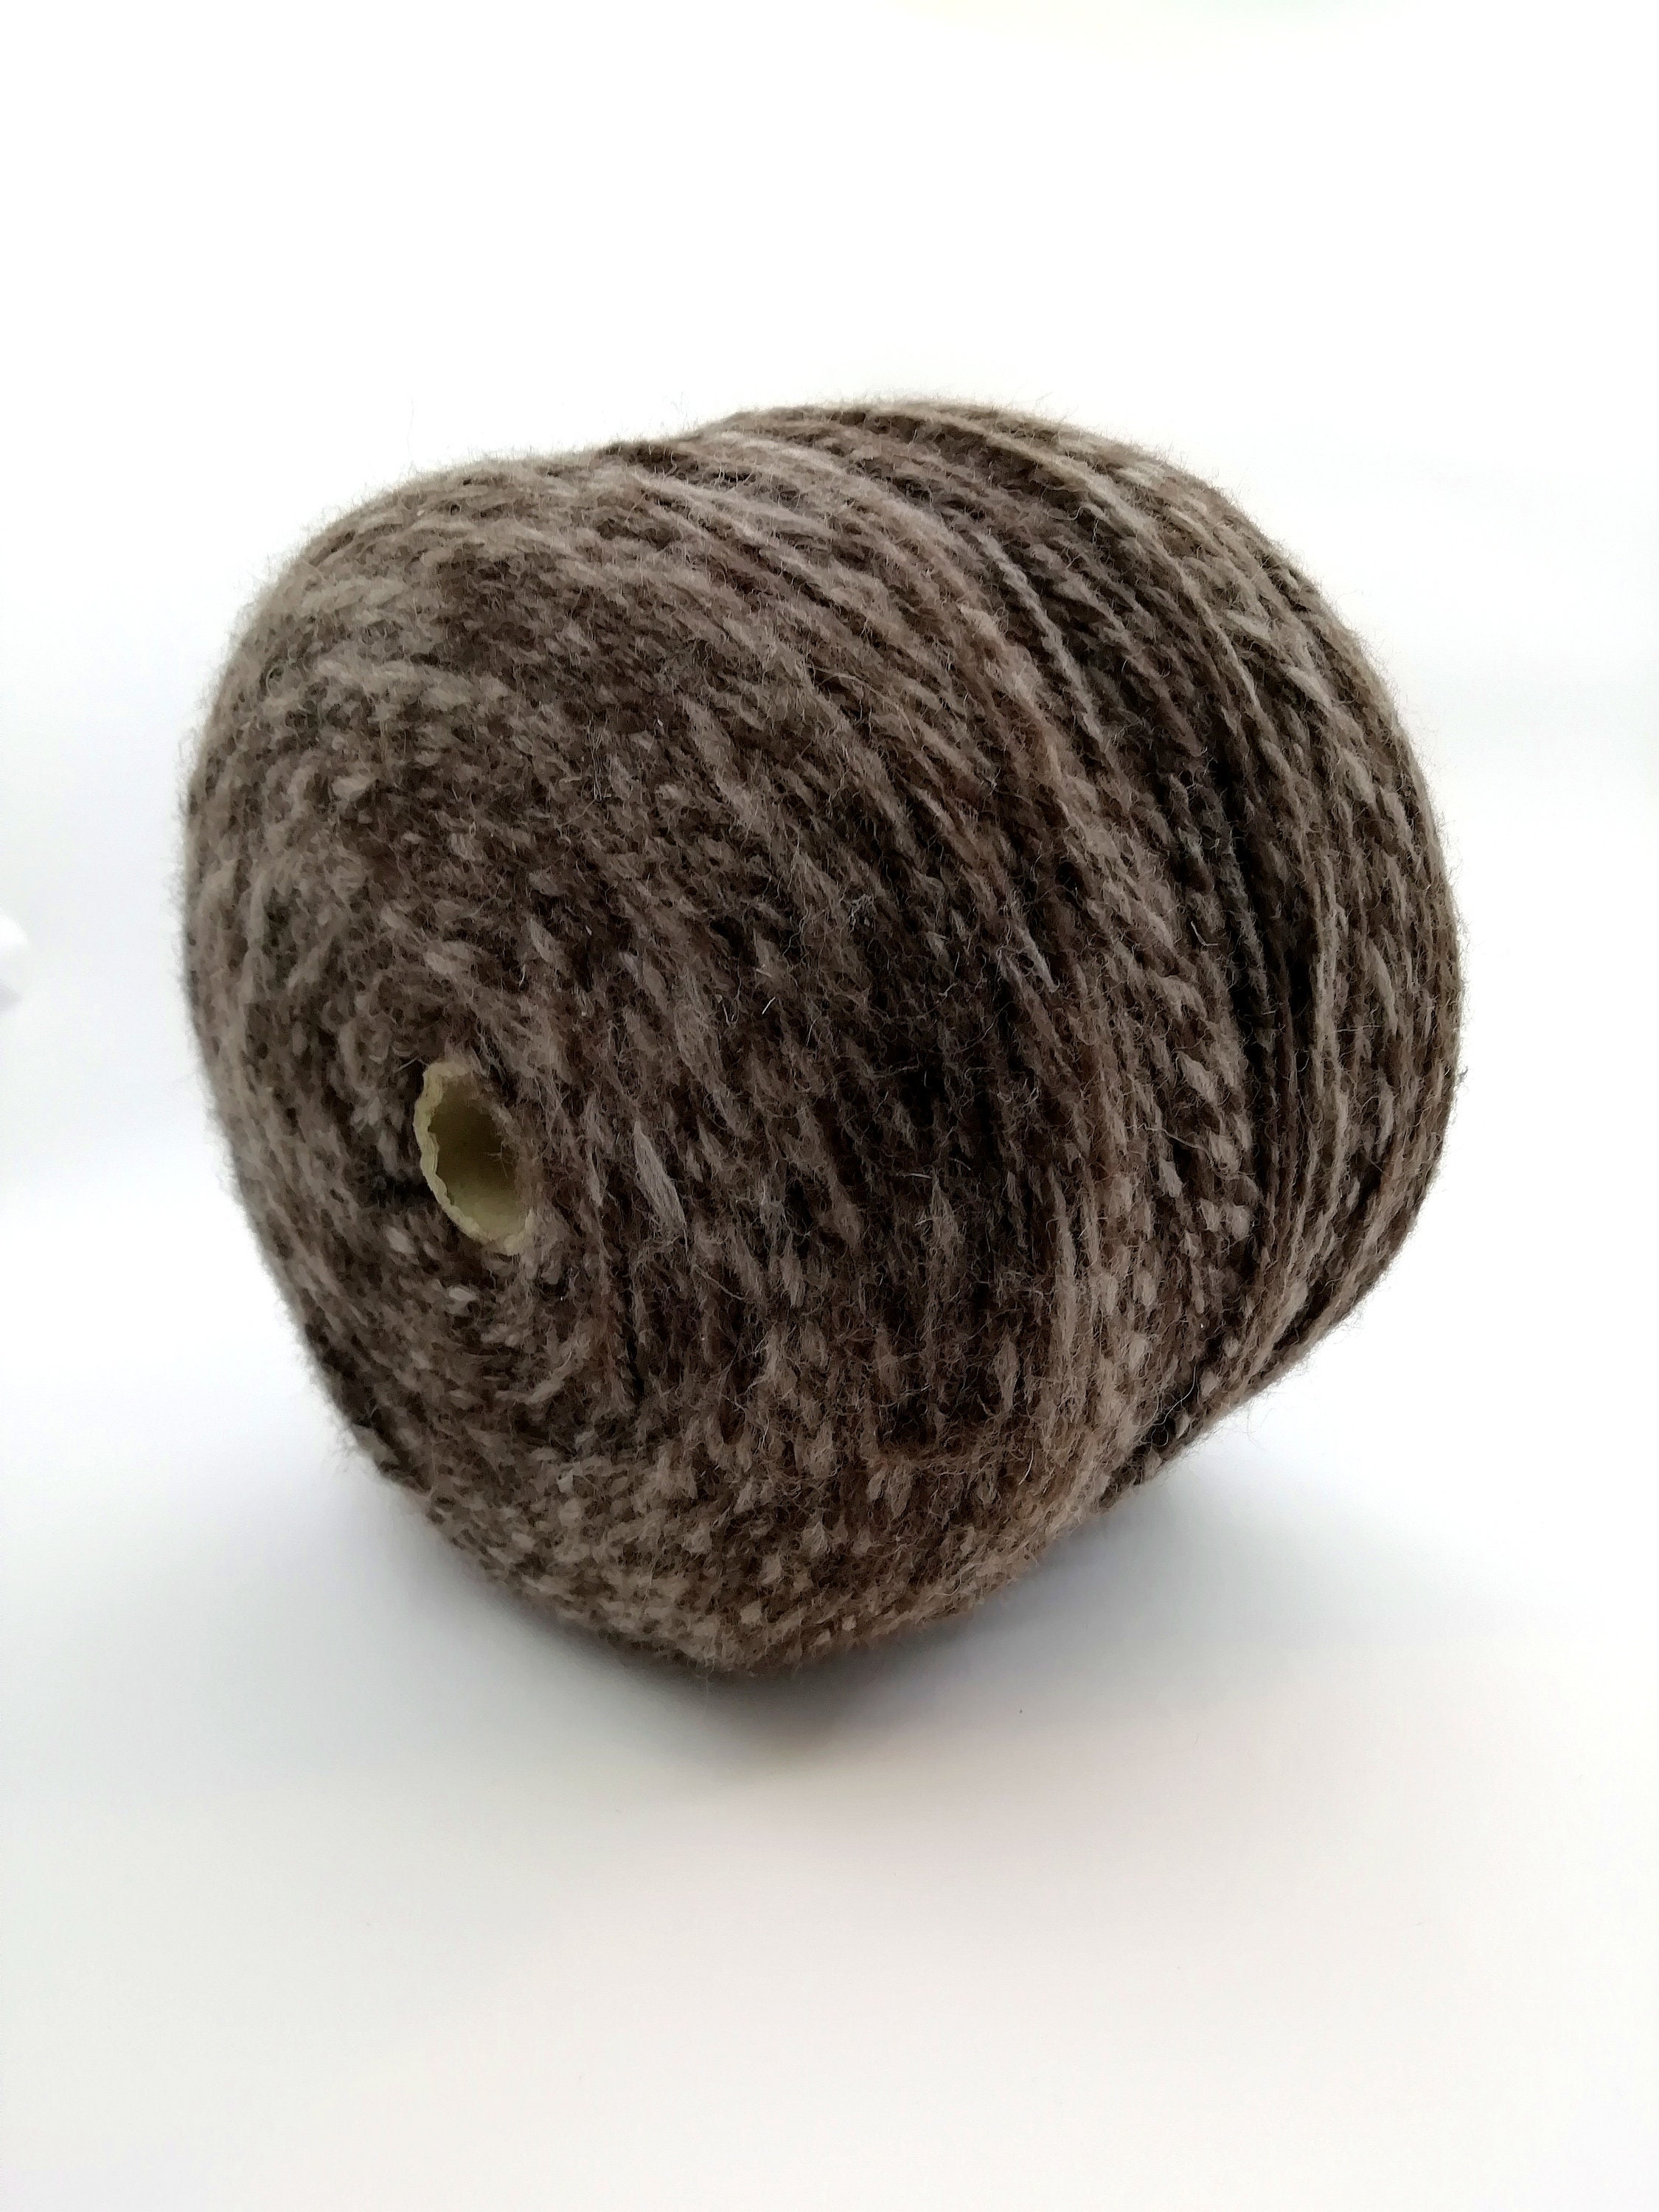 Yarn Merino Wool Chunky Knit Blended Yarn On Cone Brown Cake Cable For Hand & Machine Knitting Weaving Crochet 100G/3.5Oz